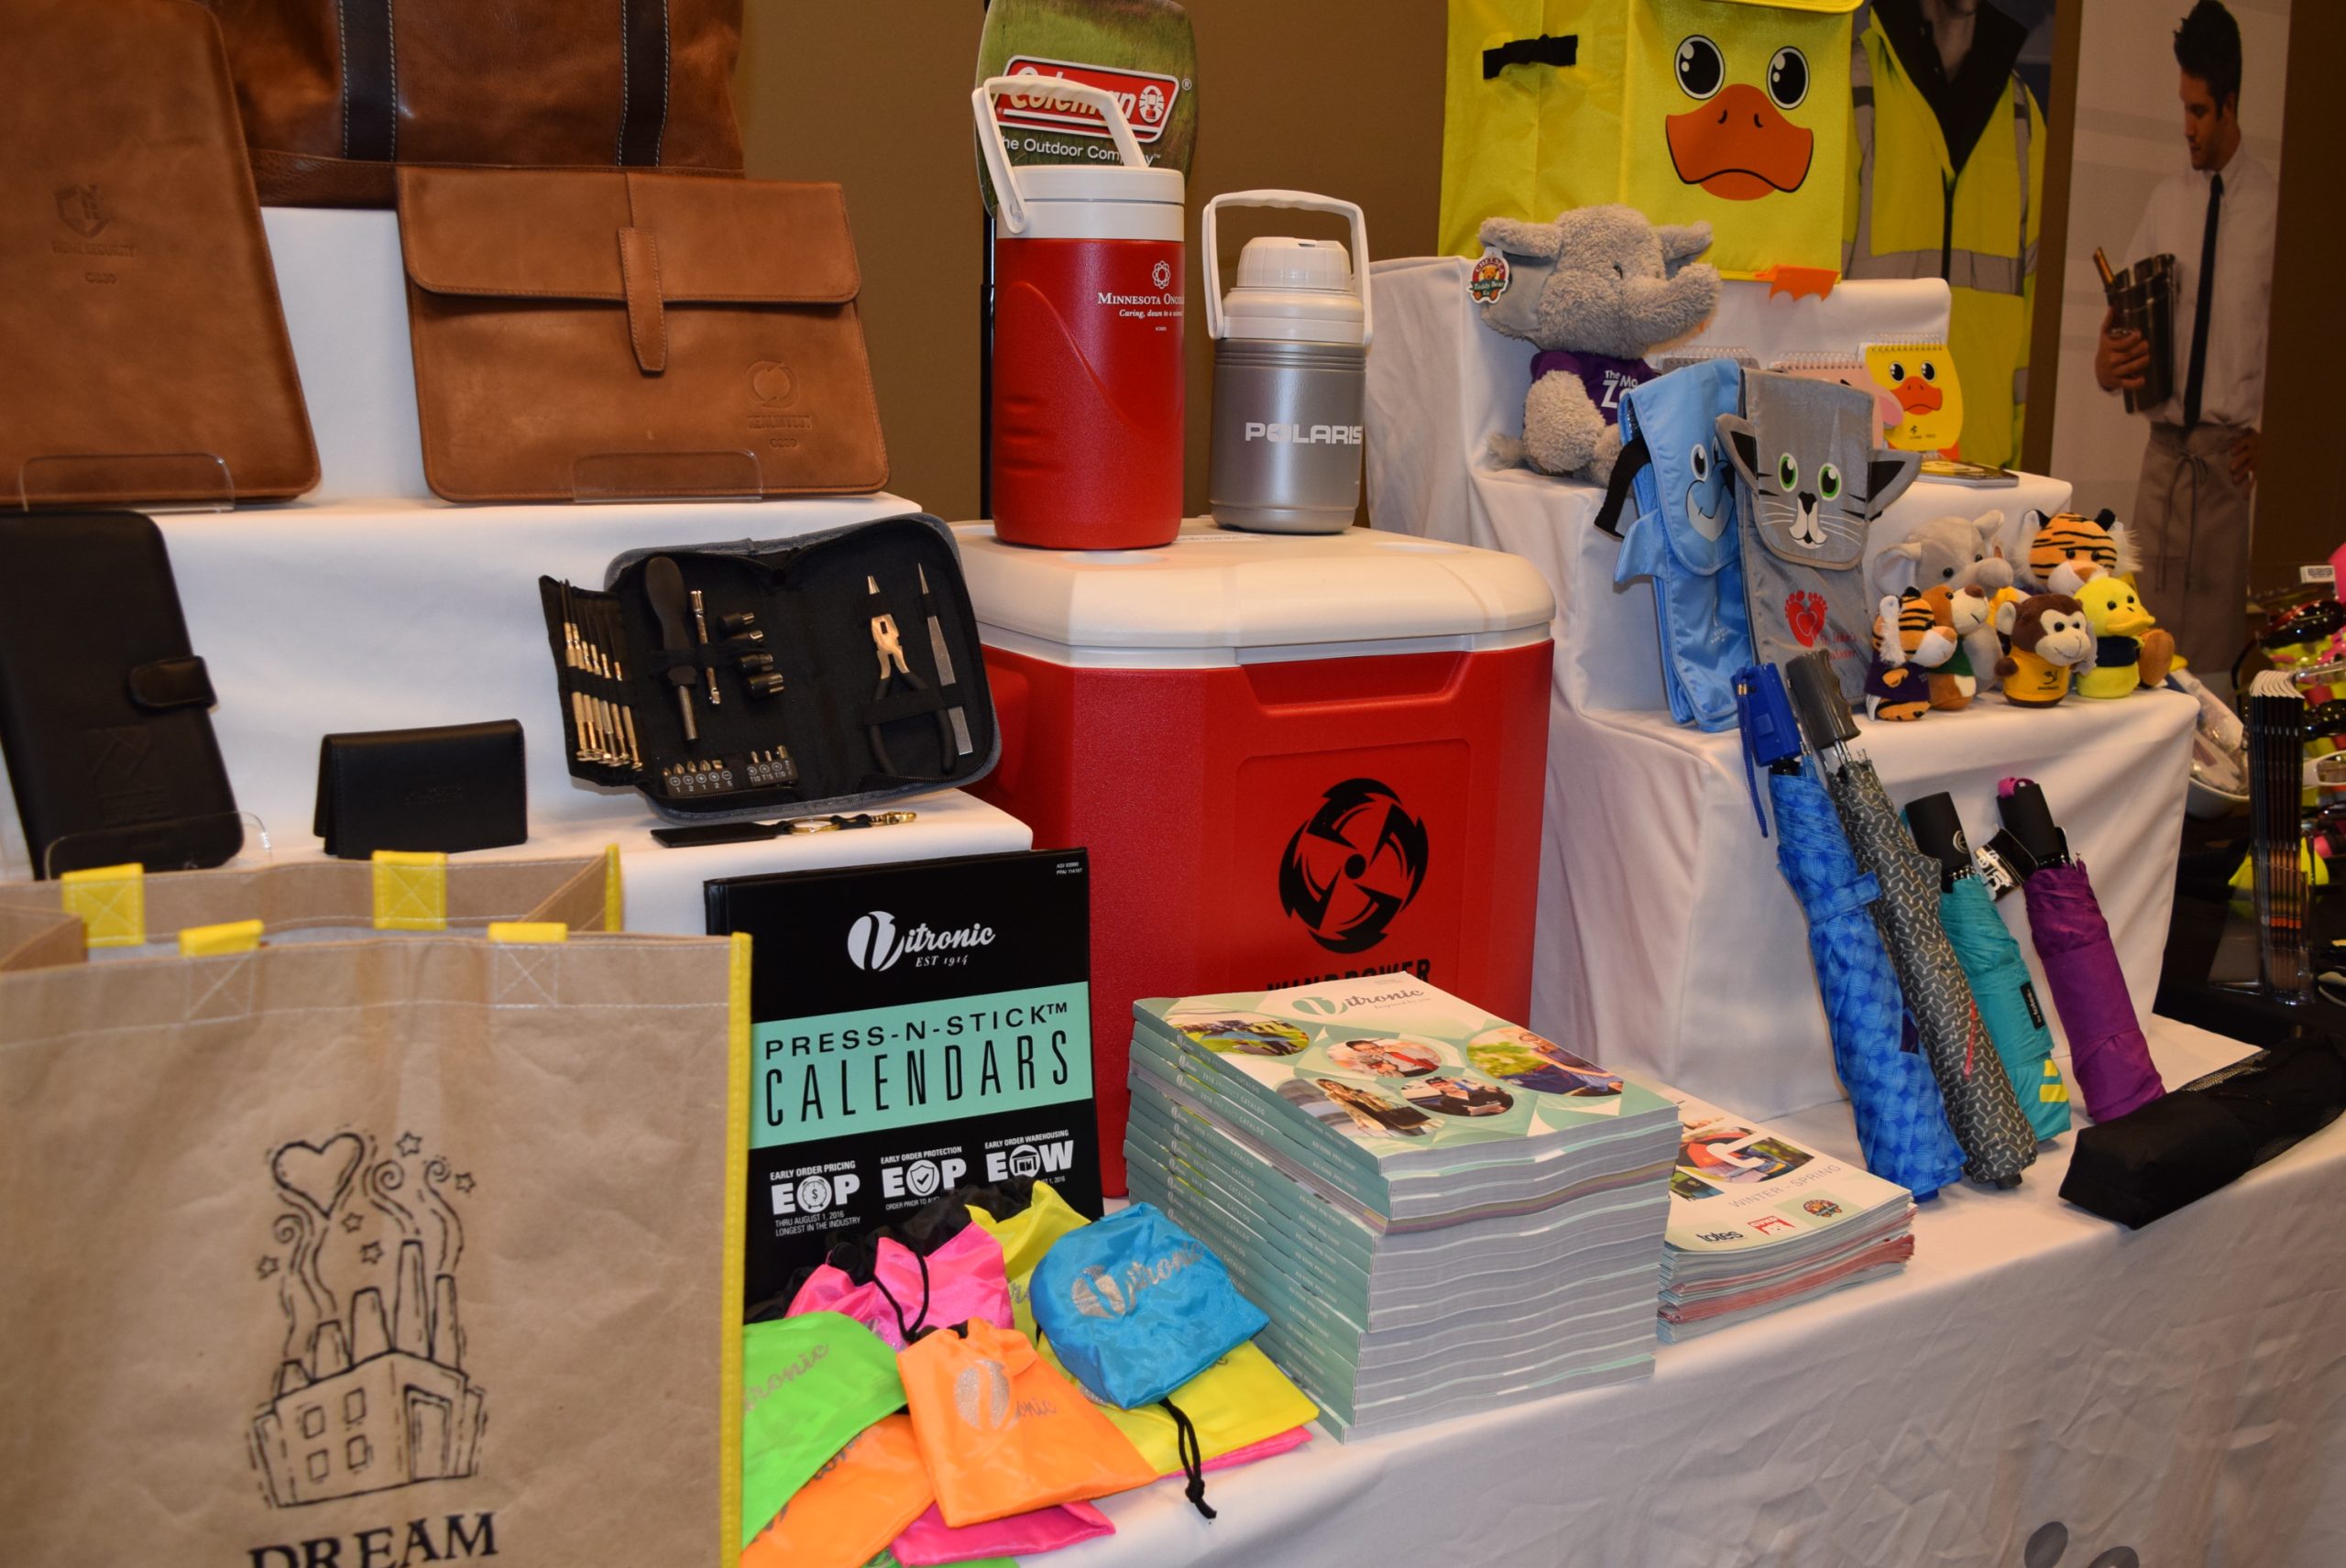 JDA partnered with the best suppliers in the business to host our Spring Product Showcase, featuring the latest promo products for spring/summer 2016!